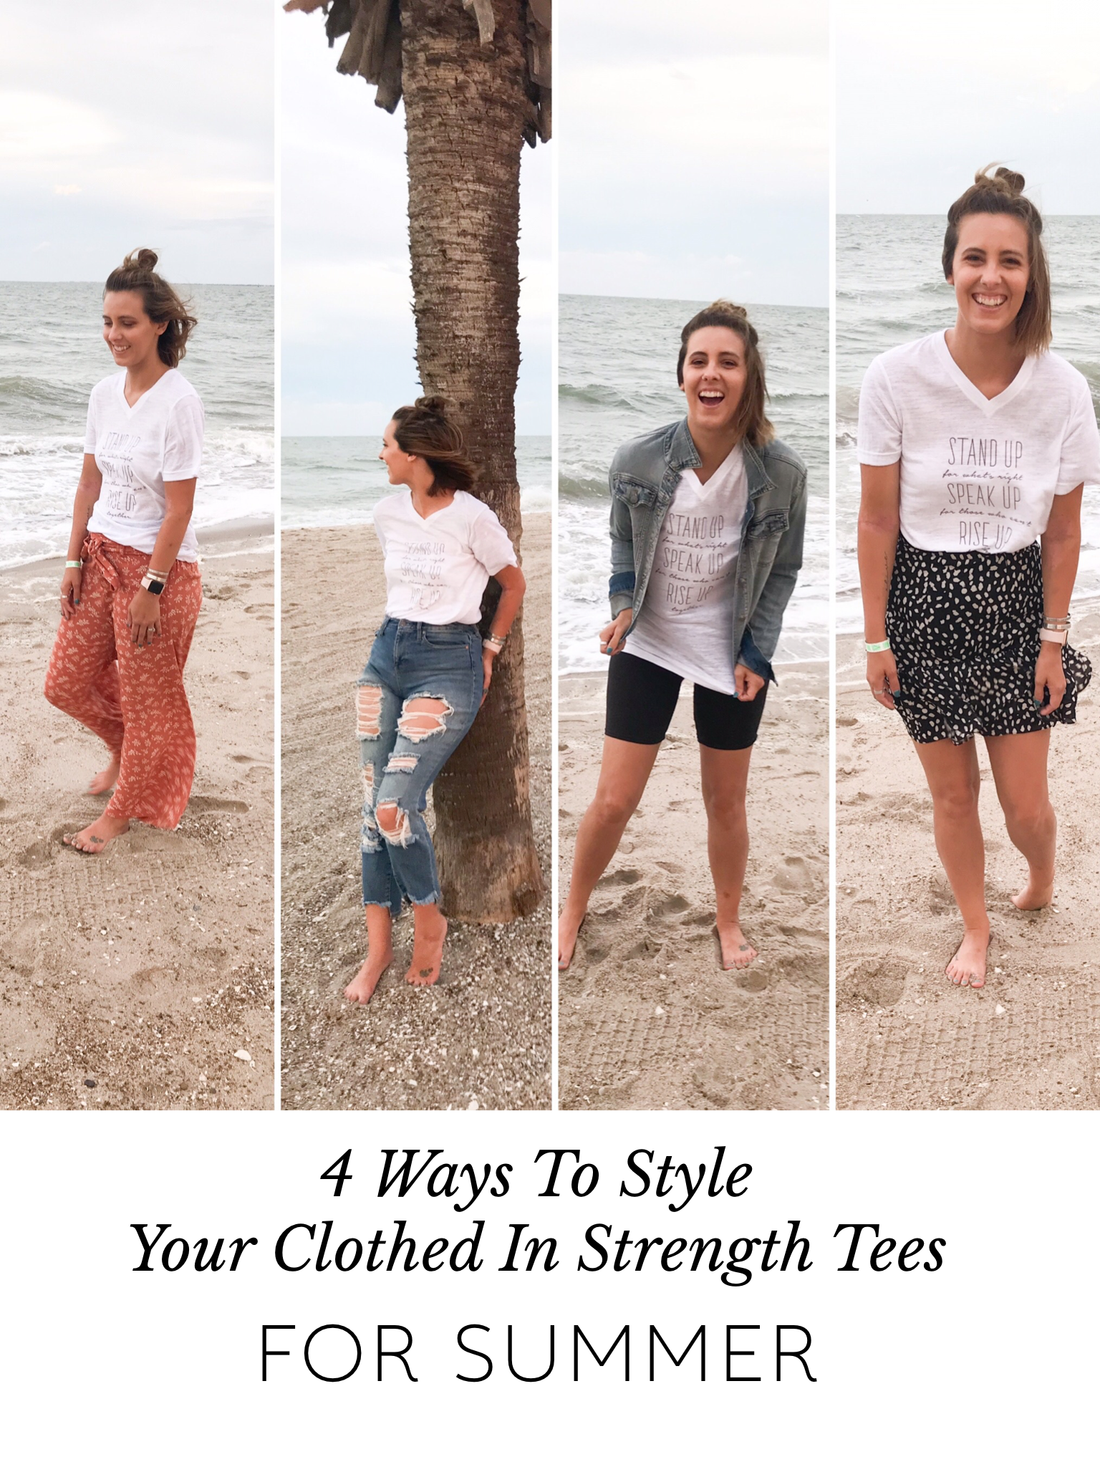 How To: Style Your Clothed In Strength Tees